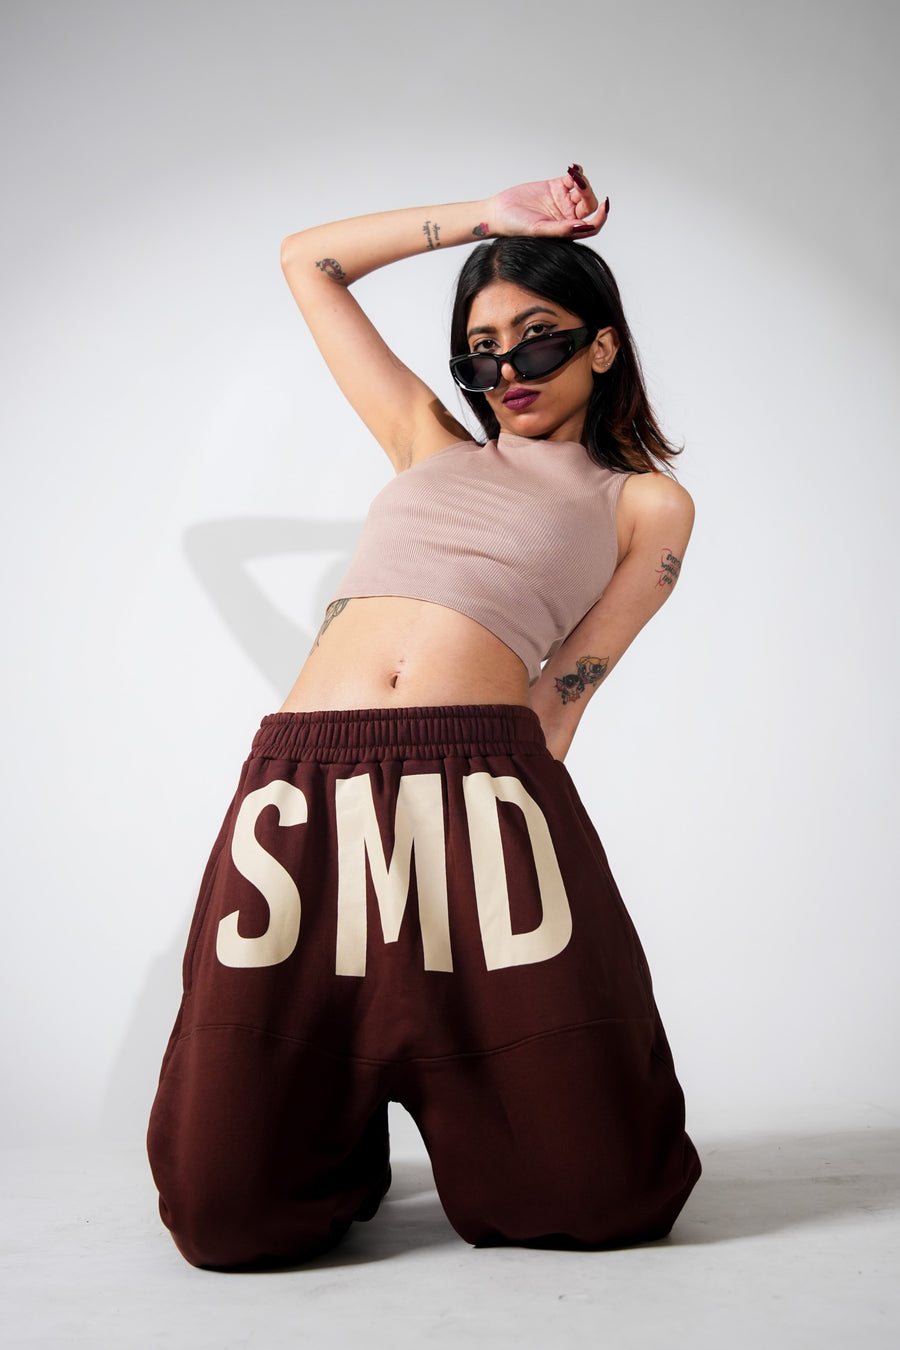 SMD Relaxed fit sweat pants For Men And Women